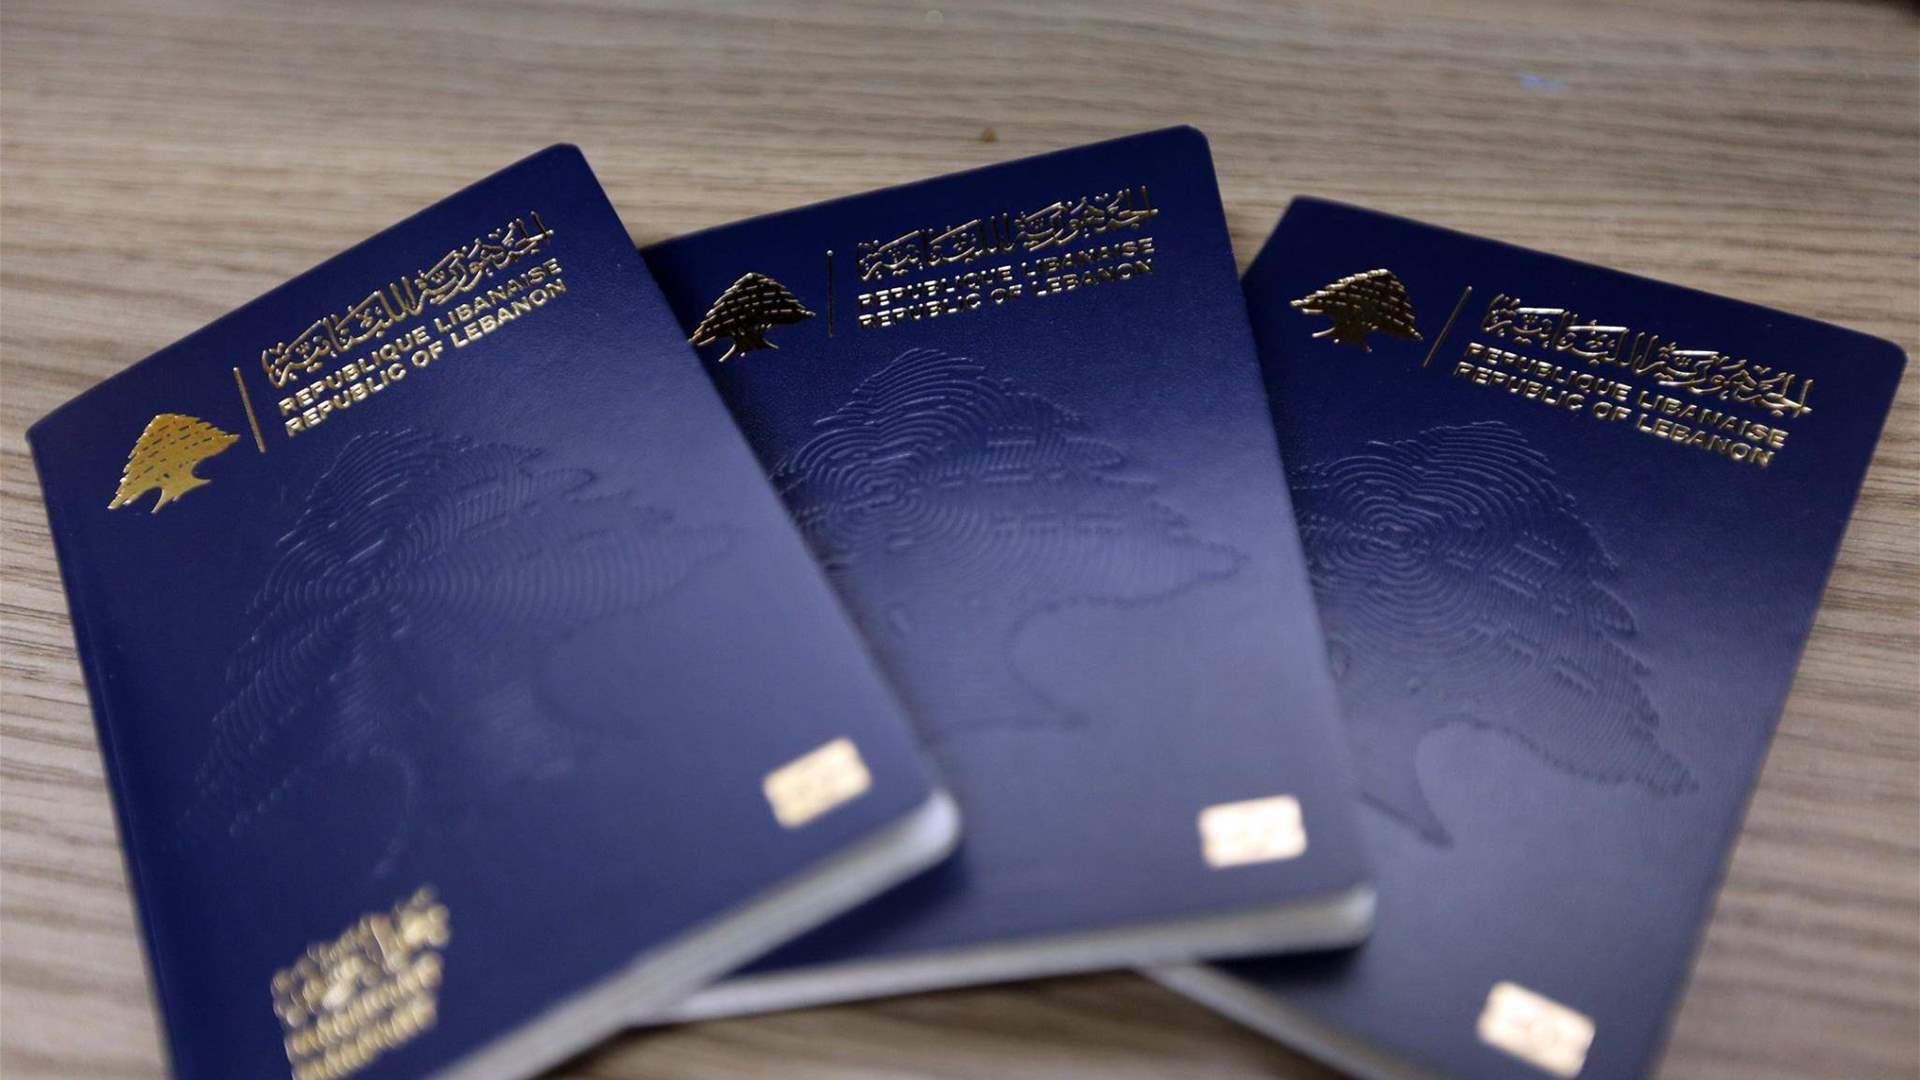 Passport fees in Lebanon among the highest in the world